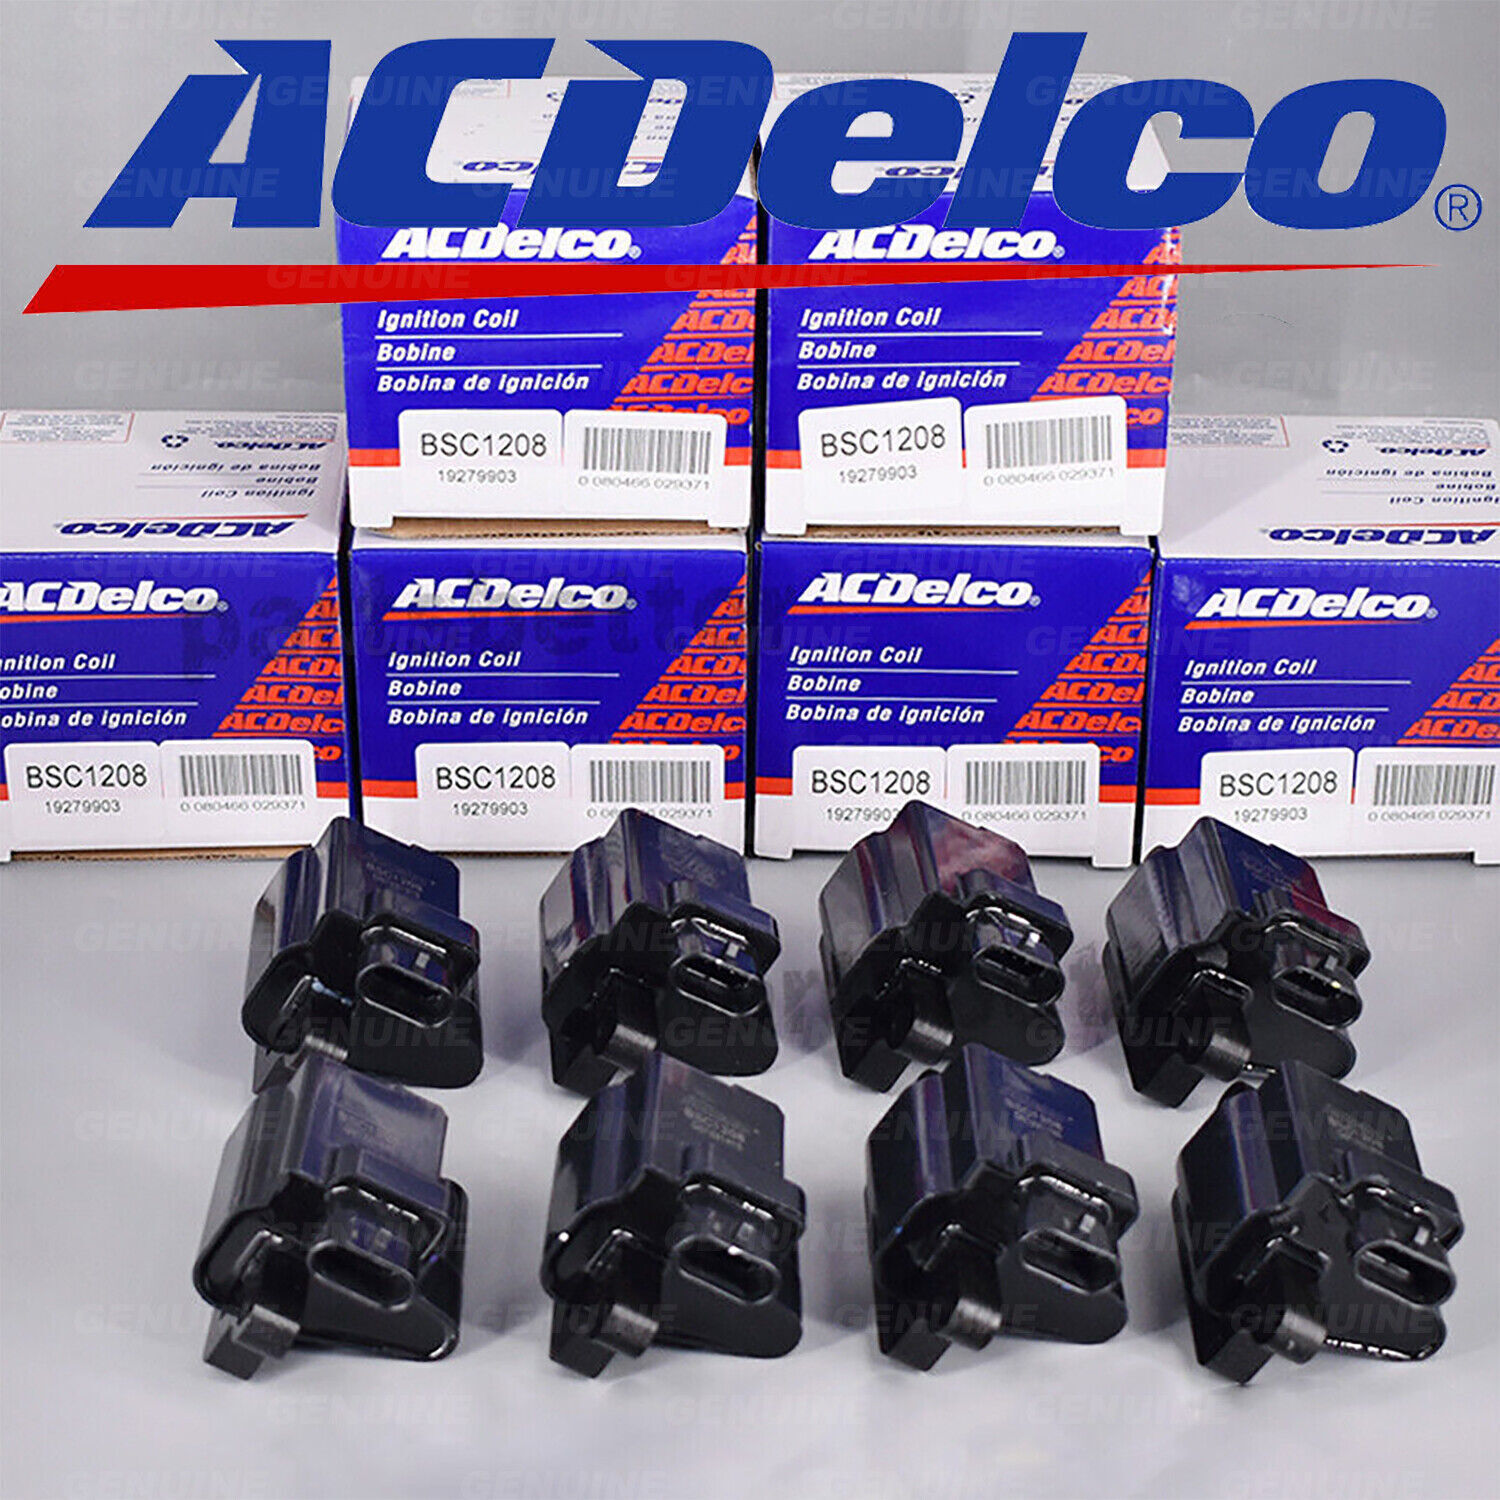 Pack of 8 Ignition Coil 12558693 for Chevy Silverado GMC D581 UF271 C561 New